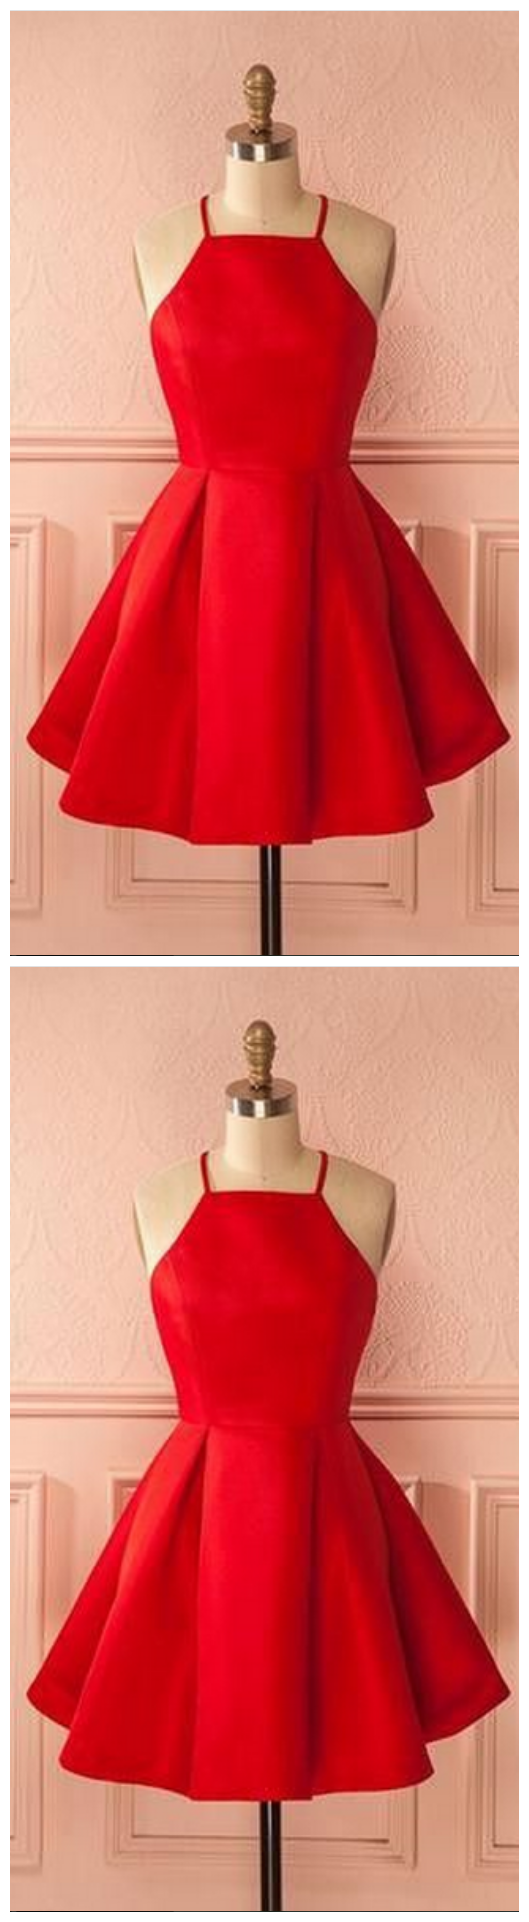 Short Red Homecoming Dress Party Dress, Short Red Dancing Dress Party Dress,backless Cocktail Dress